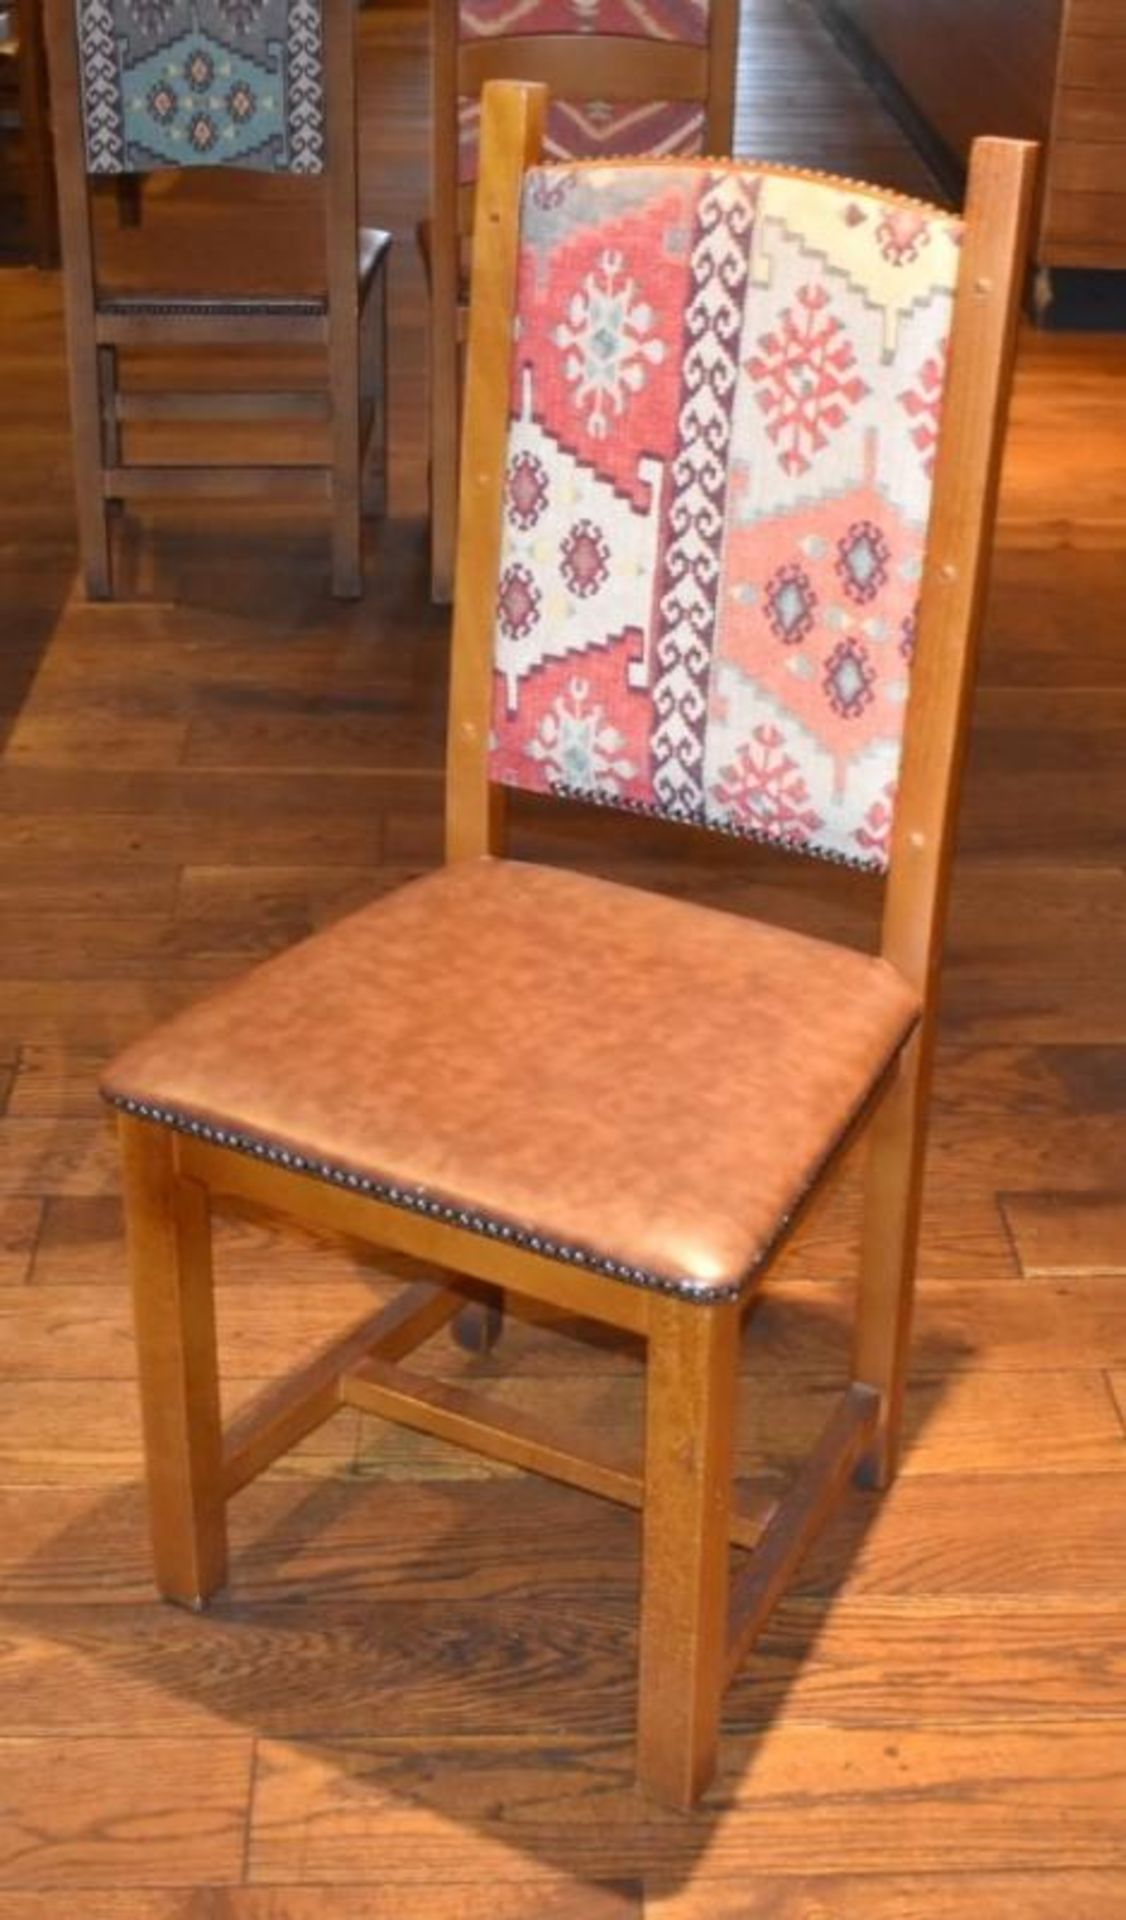 14 x Restaurant High Back Dining Chairs With Faux Leather Brown Seat Pads and Fabric Backs - H100 x - Image 3 of 6